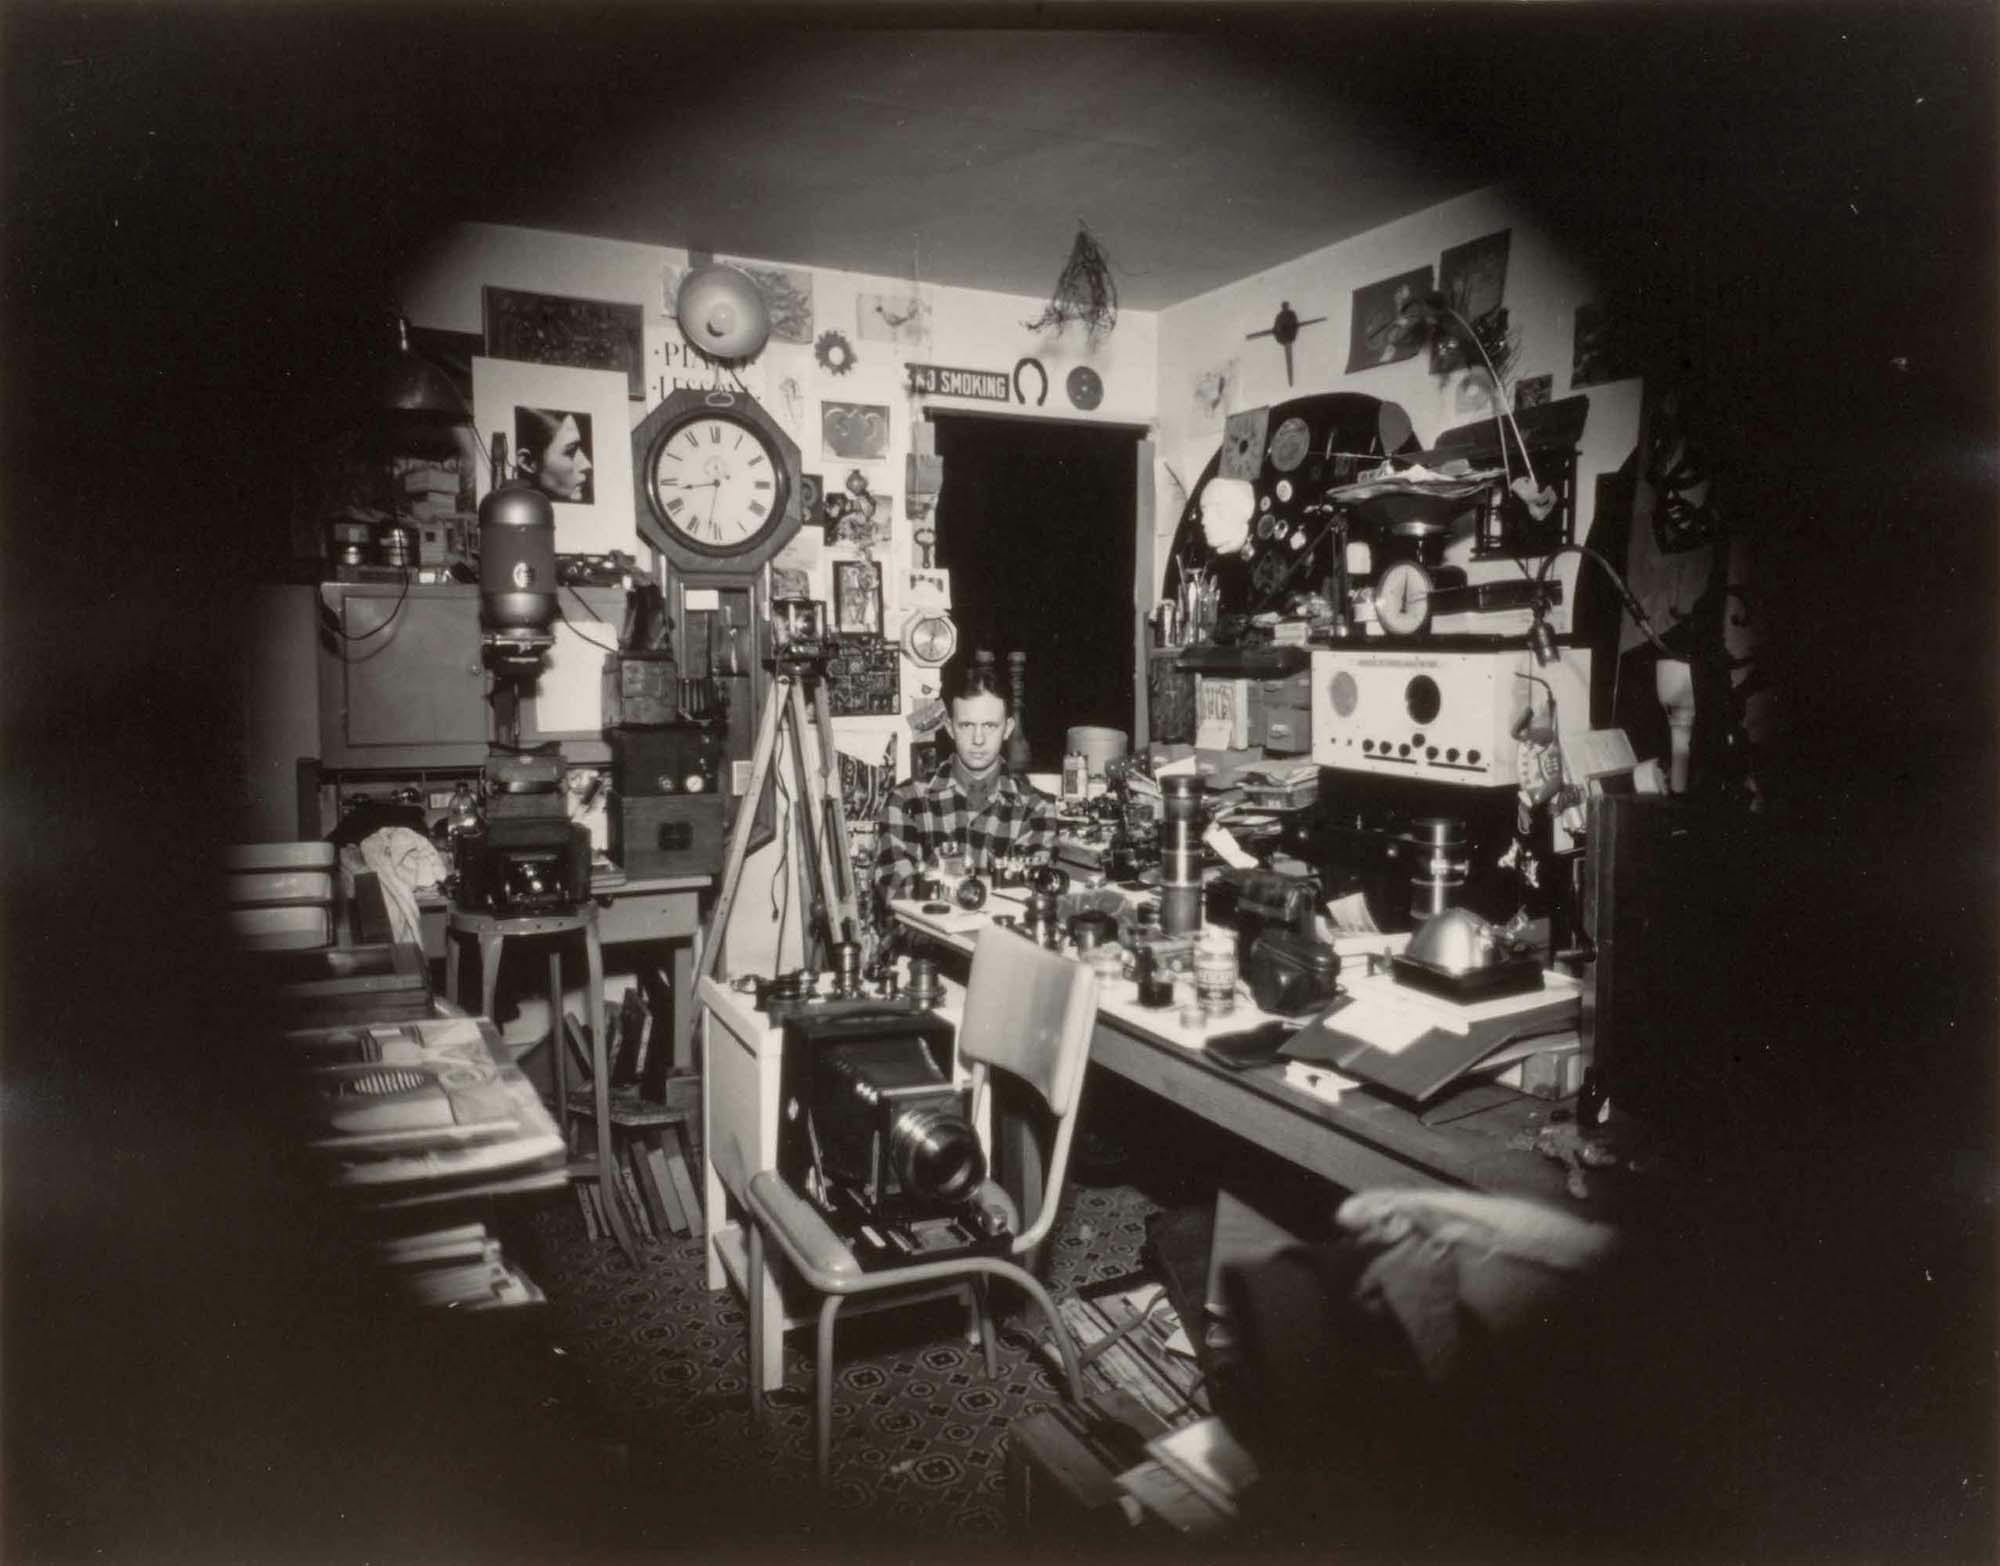 Self-portrait in Photography Studio
1951
Gelatin silver print
10 1/2 x 13 3/4 in. (26.7 x 34.9 cm)
Whitney Museum of American Art, New York, Gift of the Richard Pousette-Dart Estate (T.2017.102)
 – The Richard Pousette-Dart Foundation